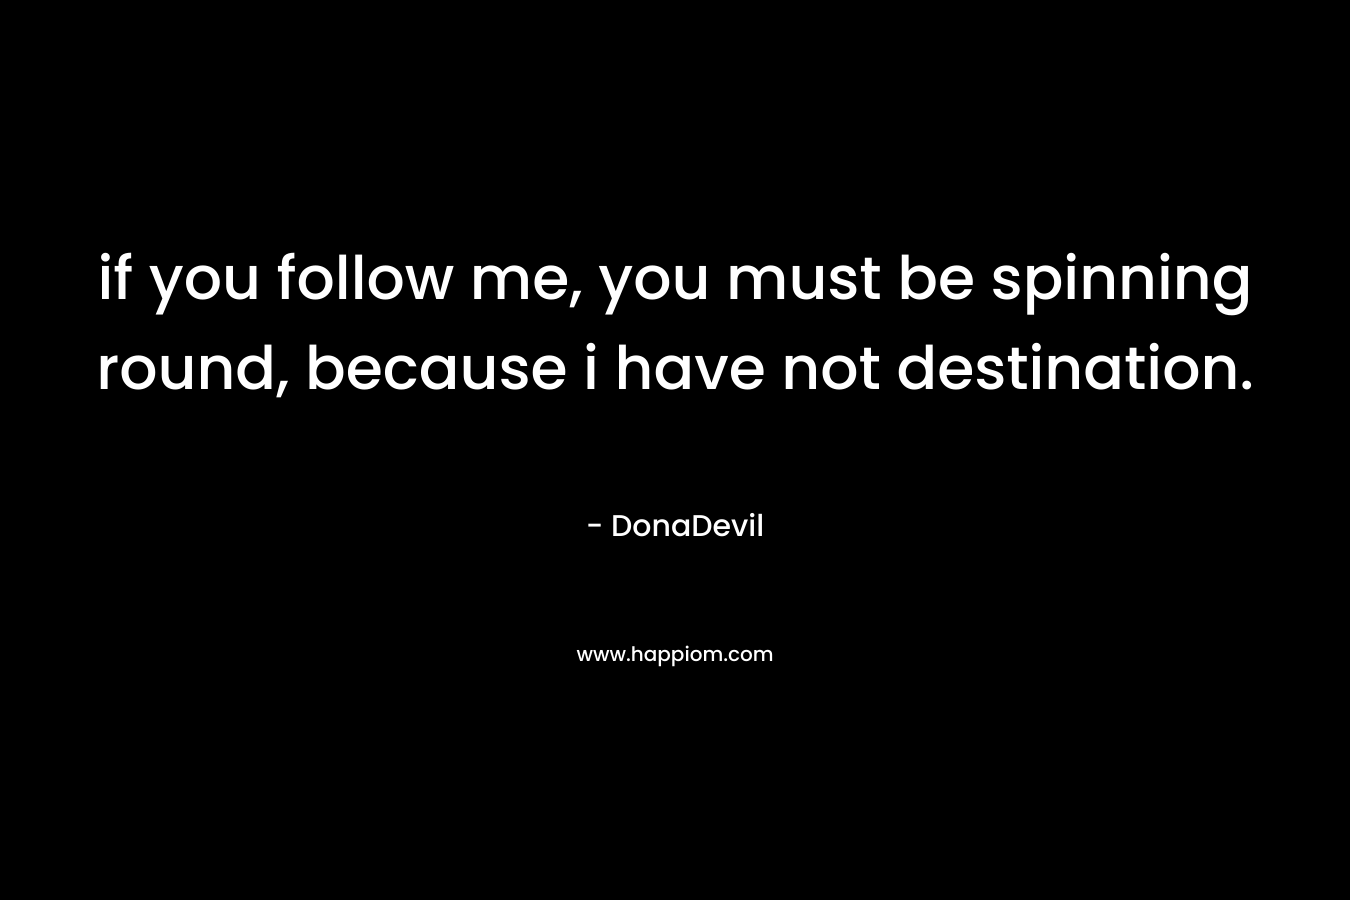 if you follow me, you must be spinning round, because i have not destination.